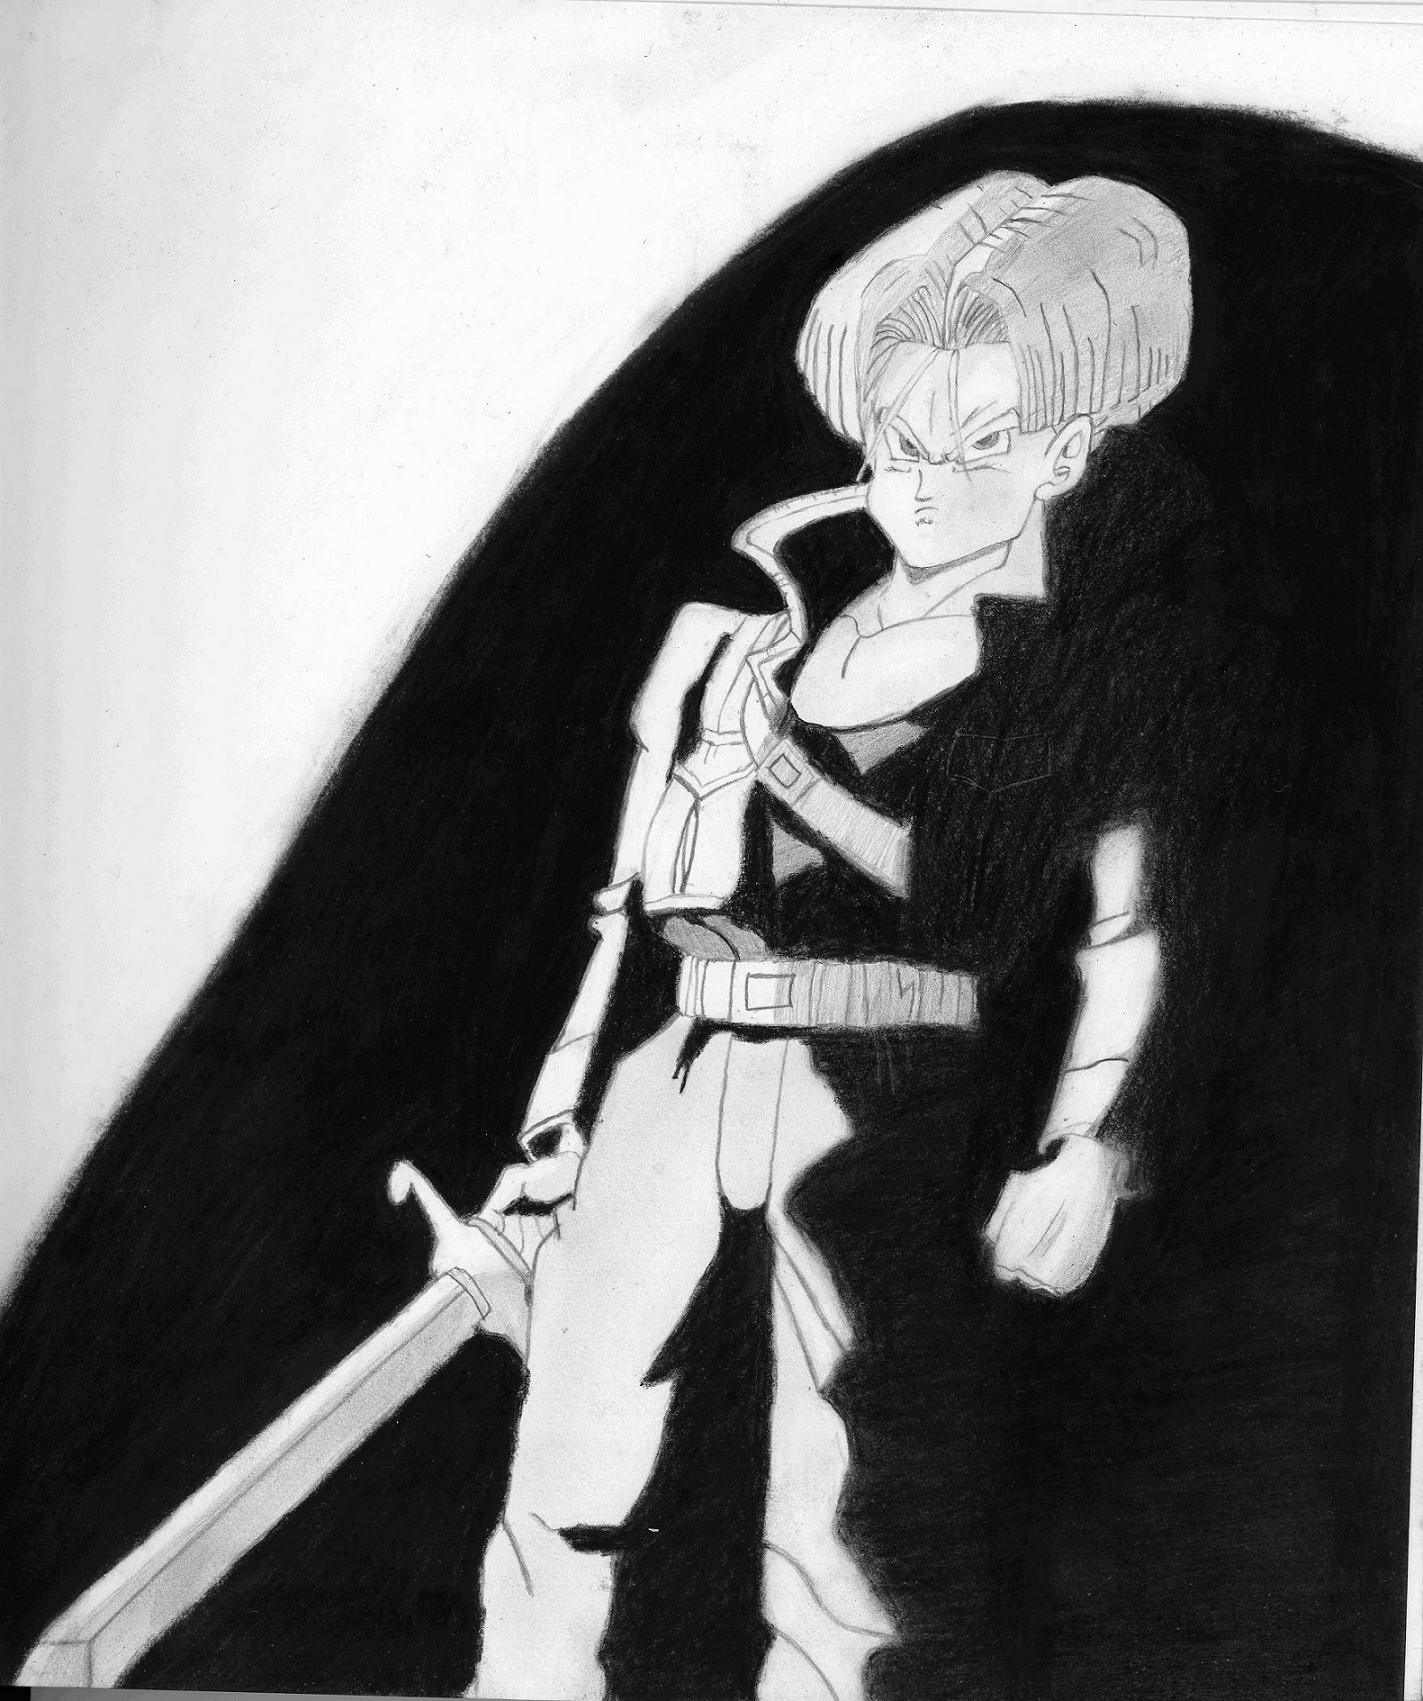 Future Trunks (Holding Sword) by Chaos7763